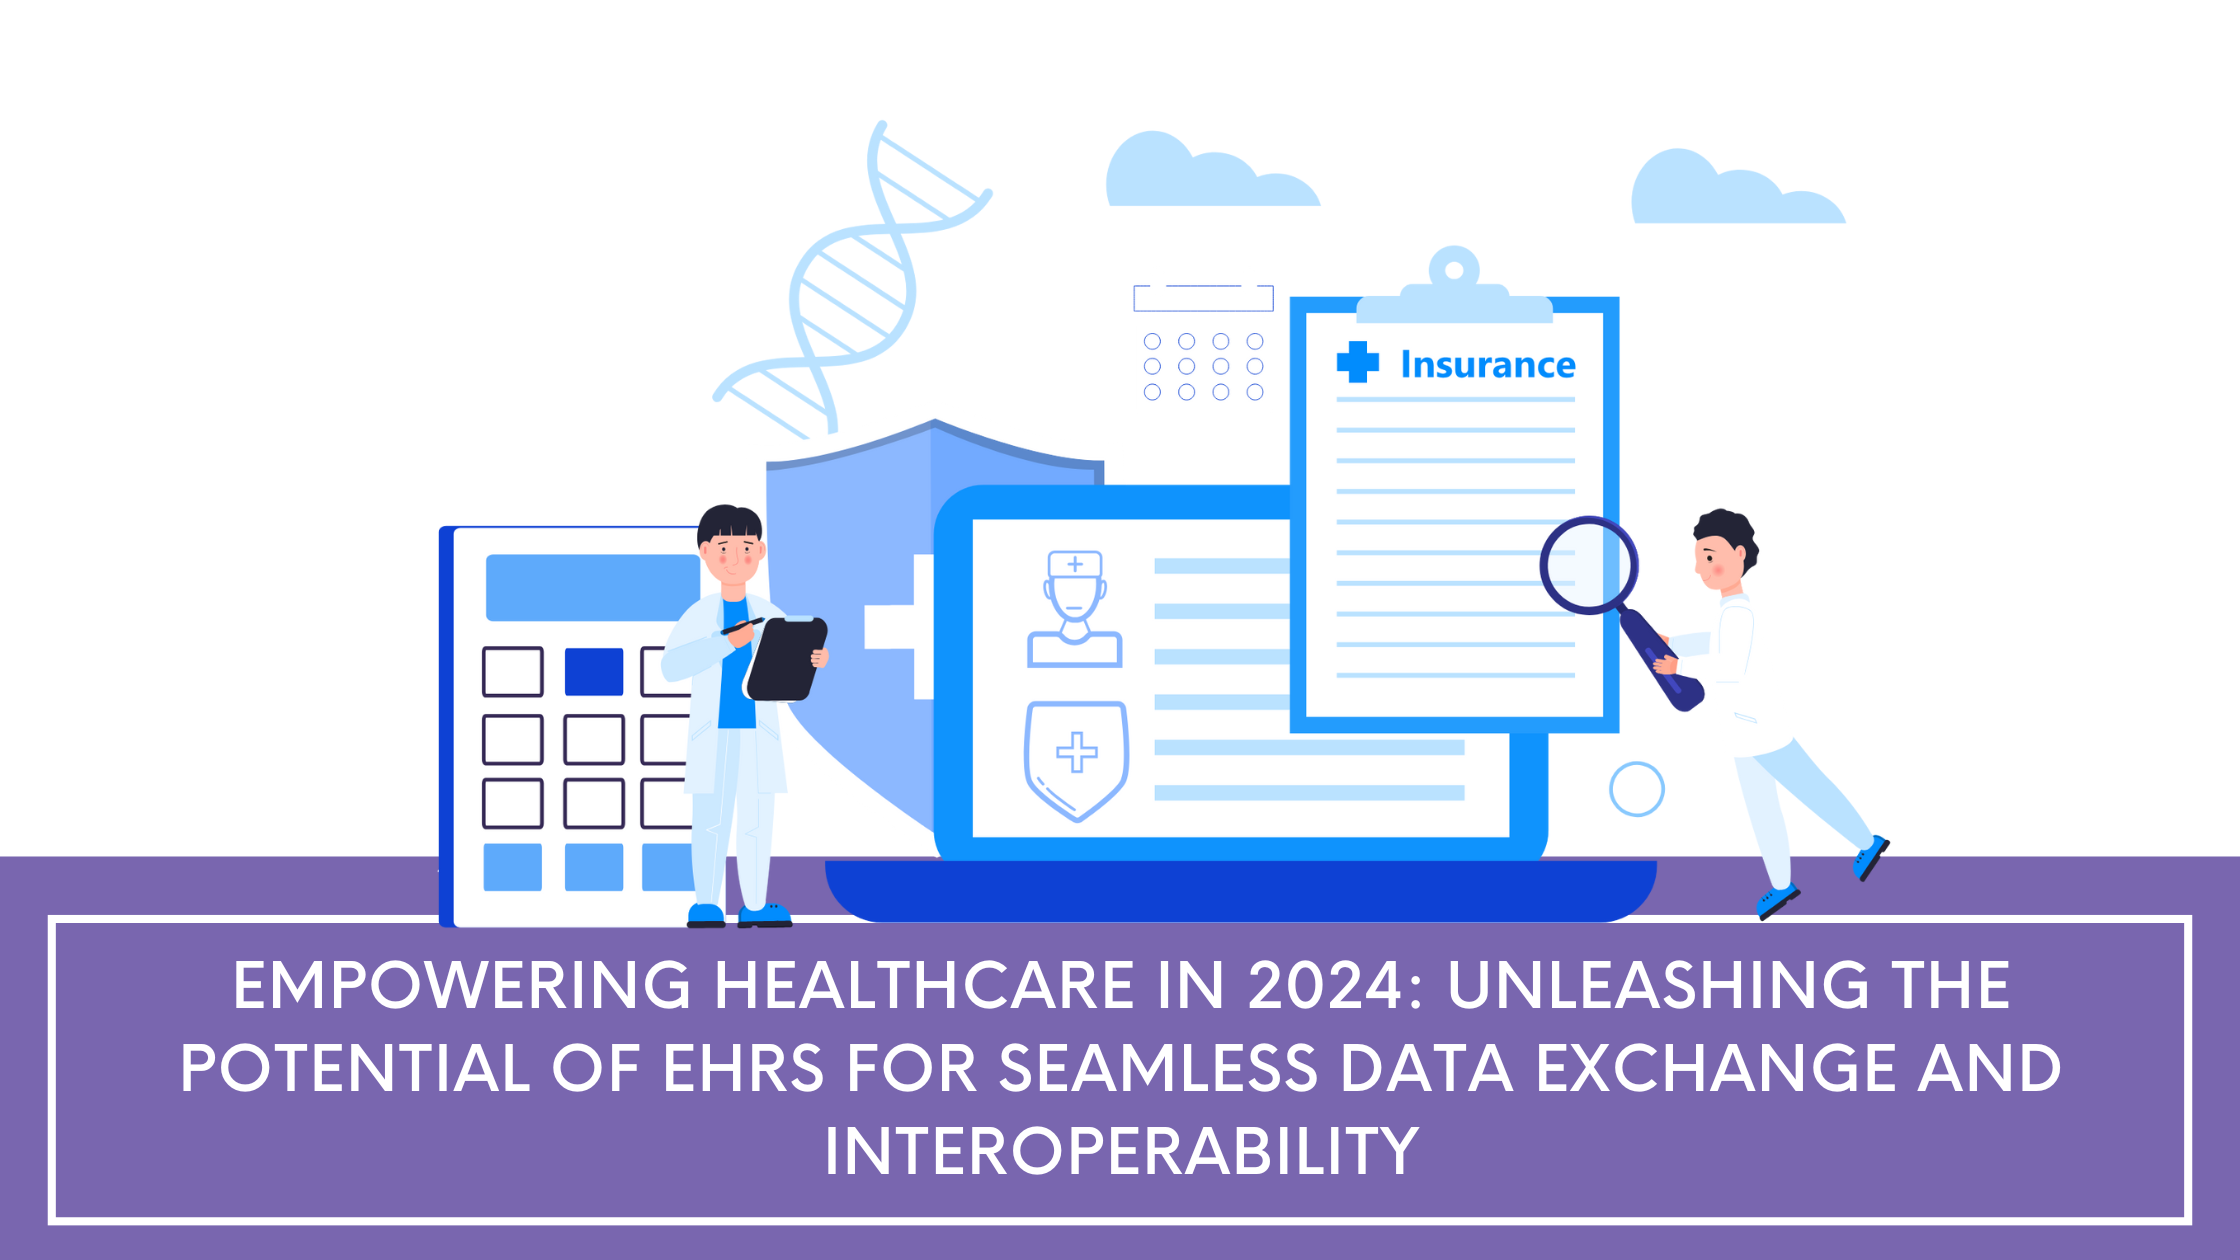 empowering healthcare in 2024 with EHR